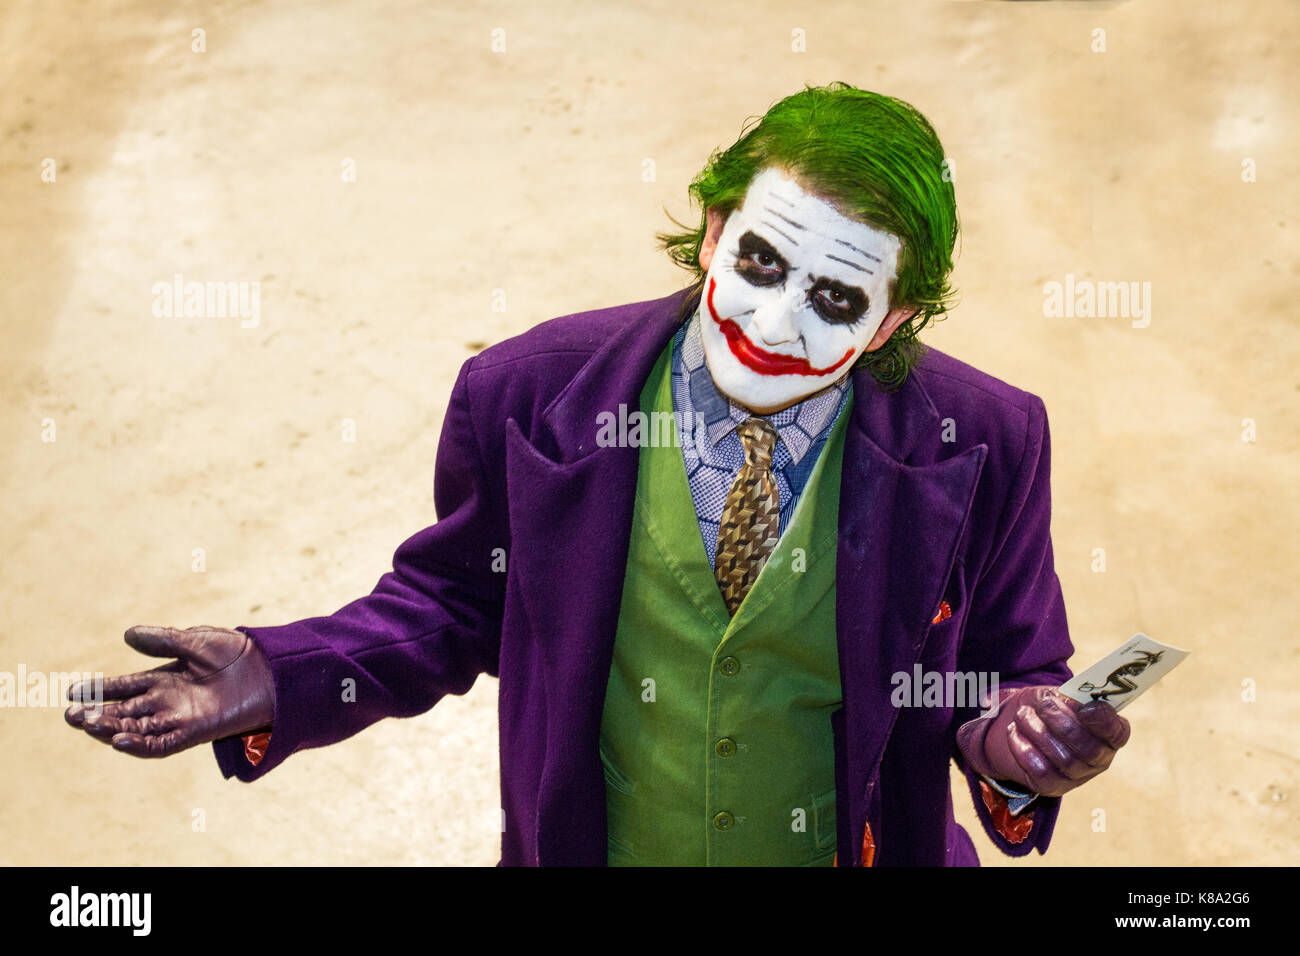 SHEFFIELD, UK - AUGUST 12, 2017. A cosplayer at A comic con event dressed as The Joker from The Batman movies looking straight at the camera Stock Photo